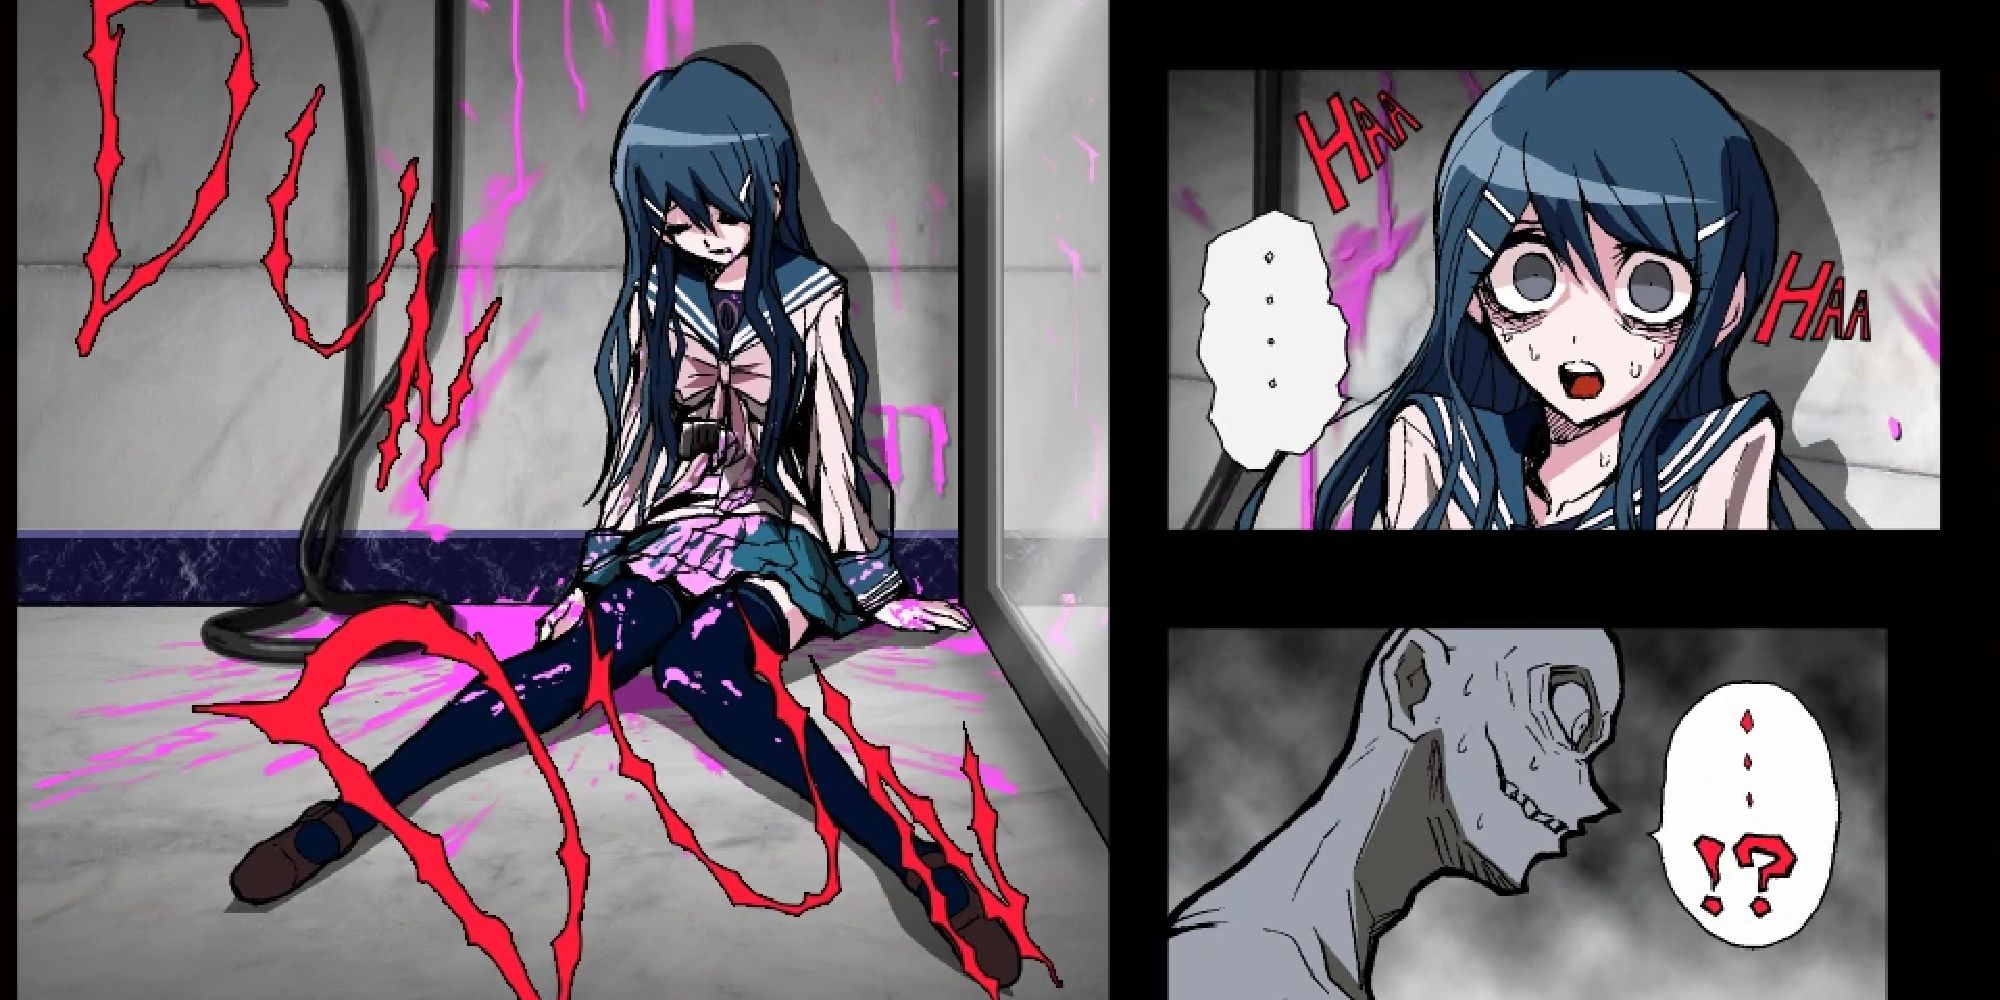 sayaka dead in the bathroom after writing a message